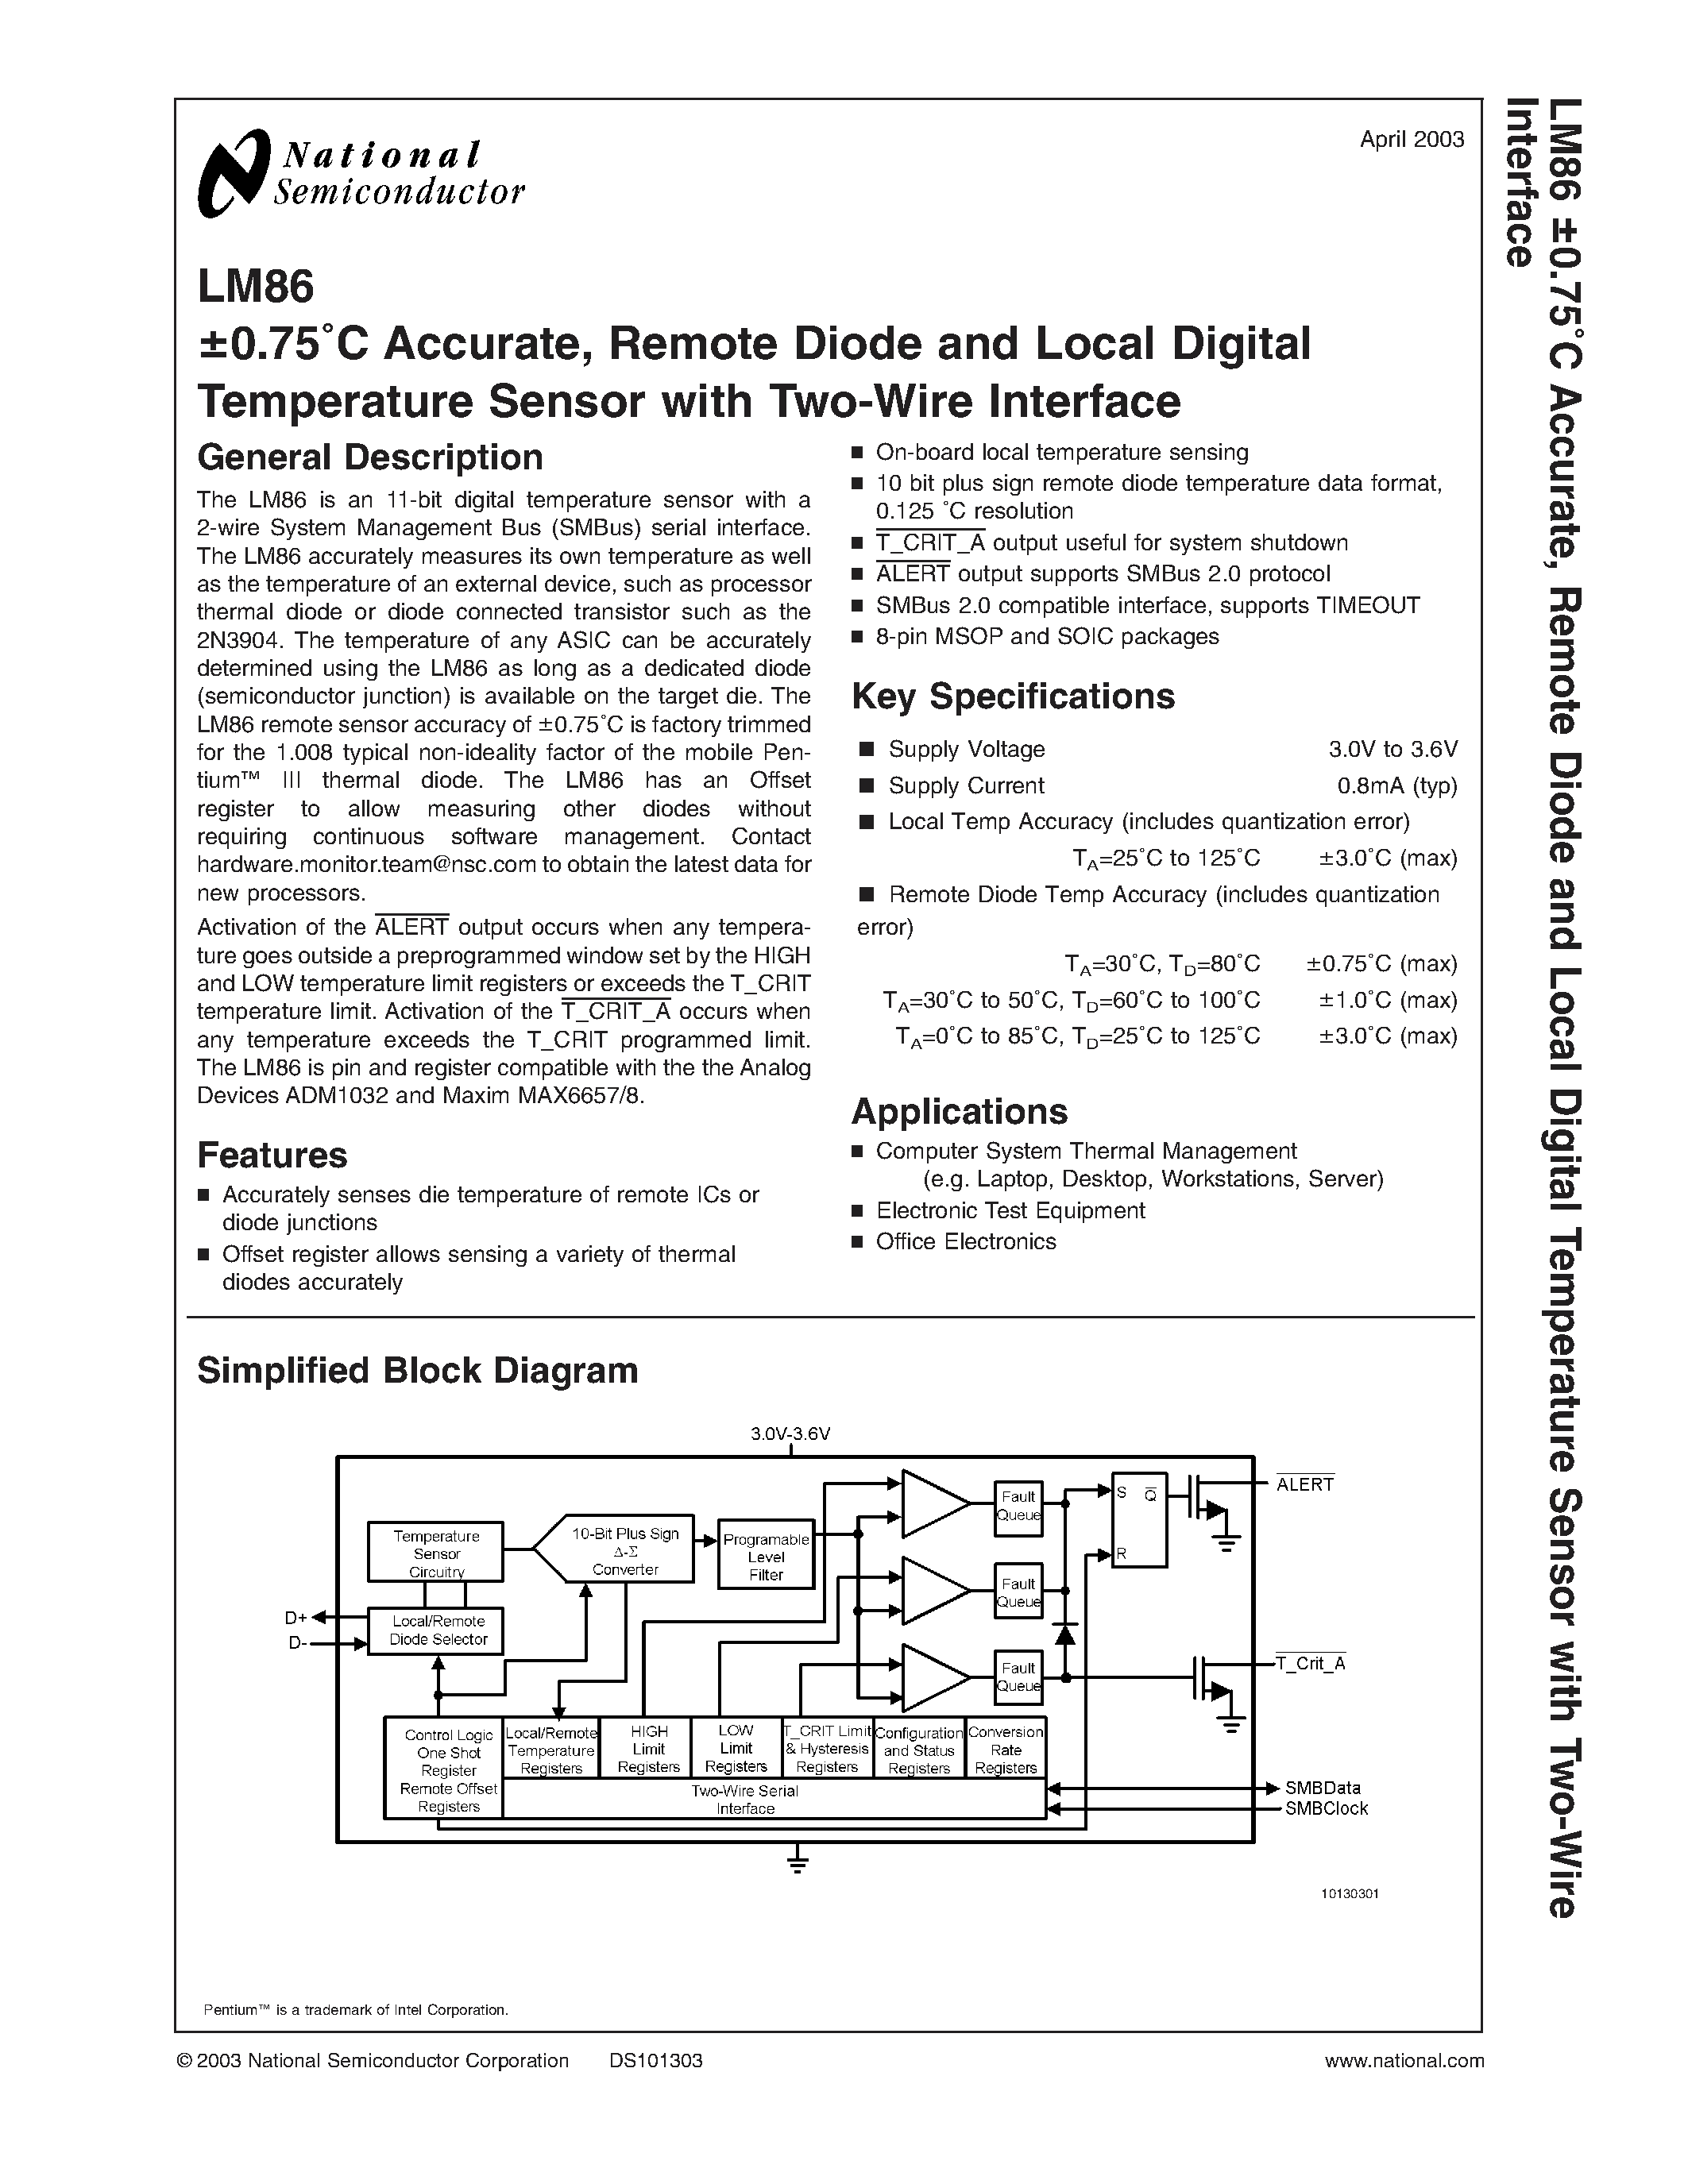 Datasheet LM86CIM - 0.75C Accurate / Remote Diode and Local Digital Temperature Sensor with Two-Wire Interface page 1